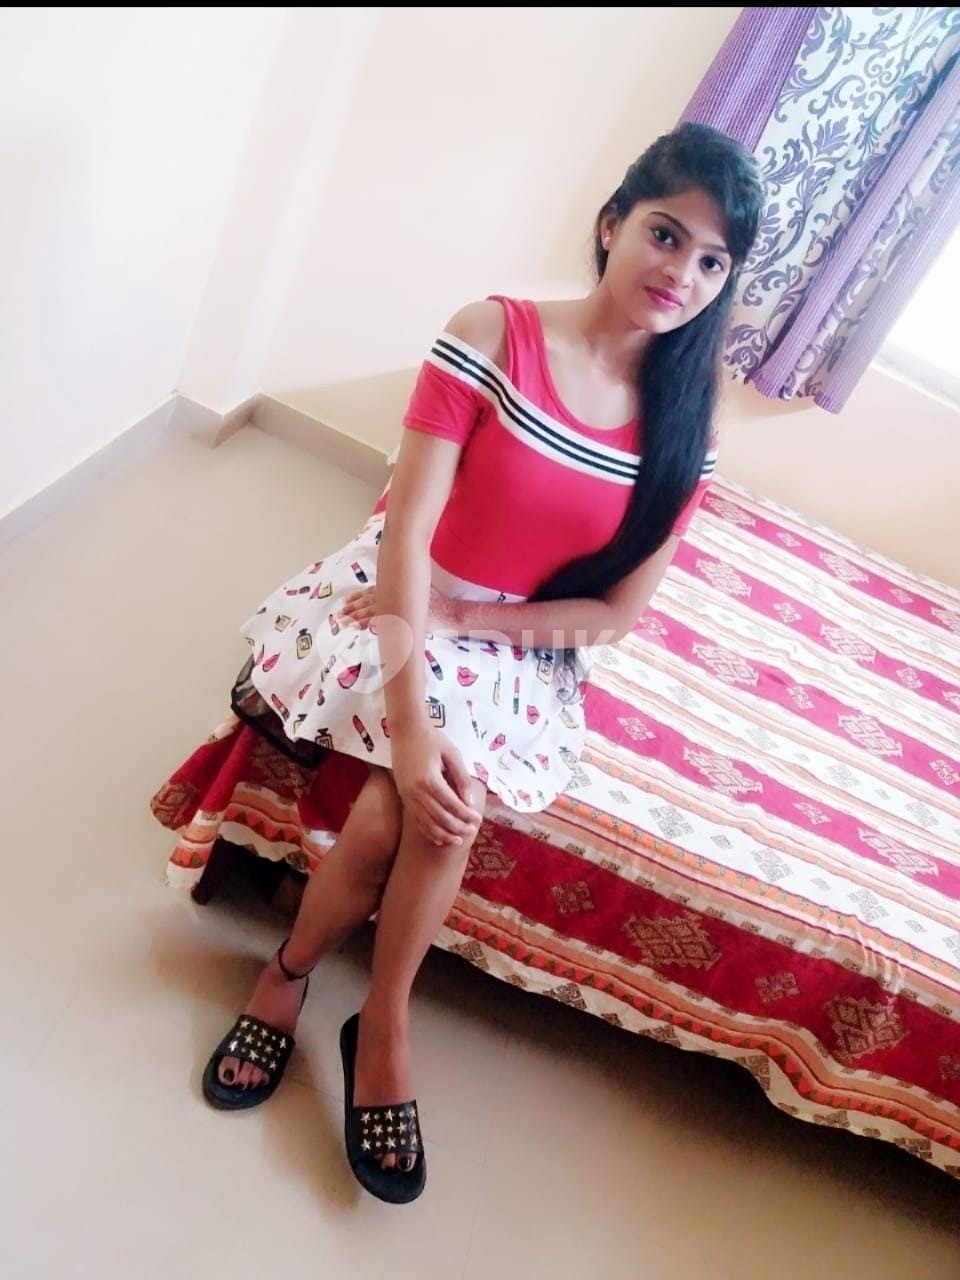 Myself Divya call girl low-cost Telugu independent housewife college full safe and secure sarvice available